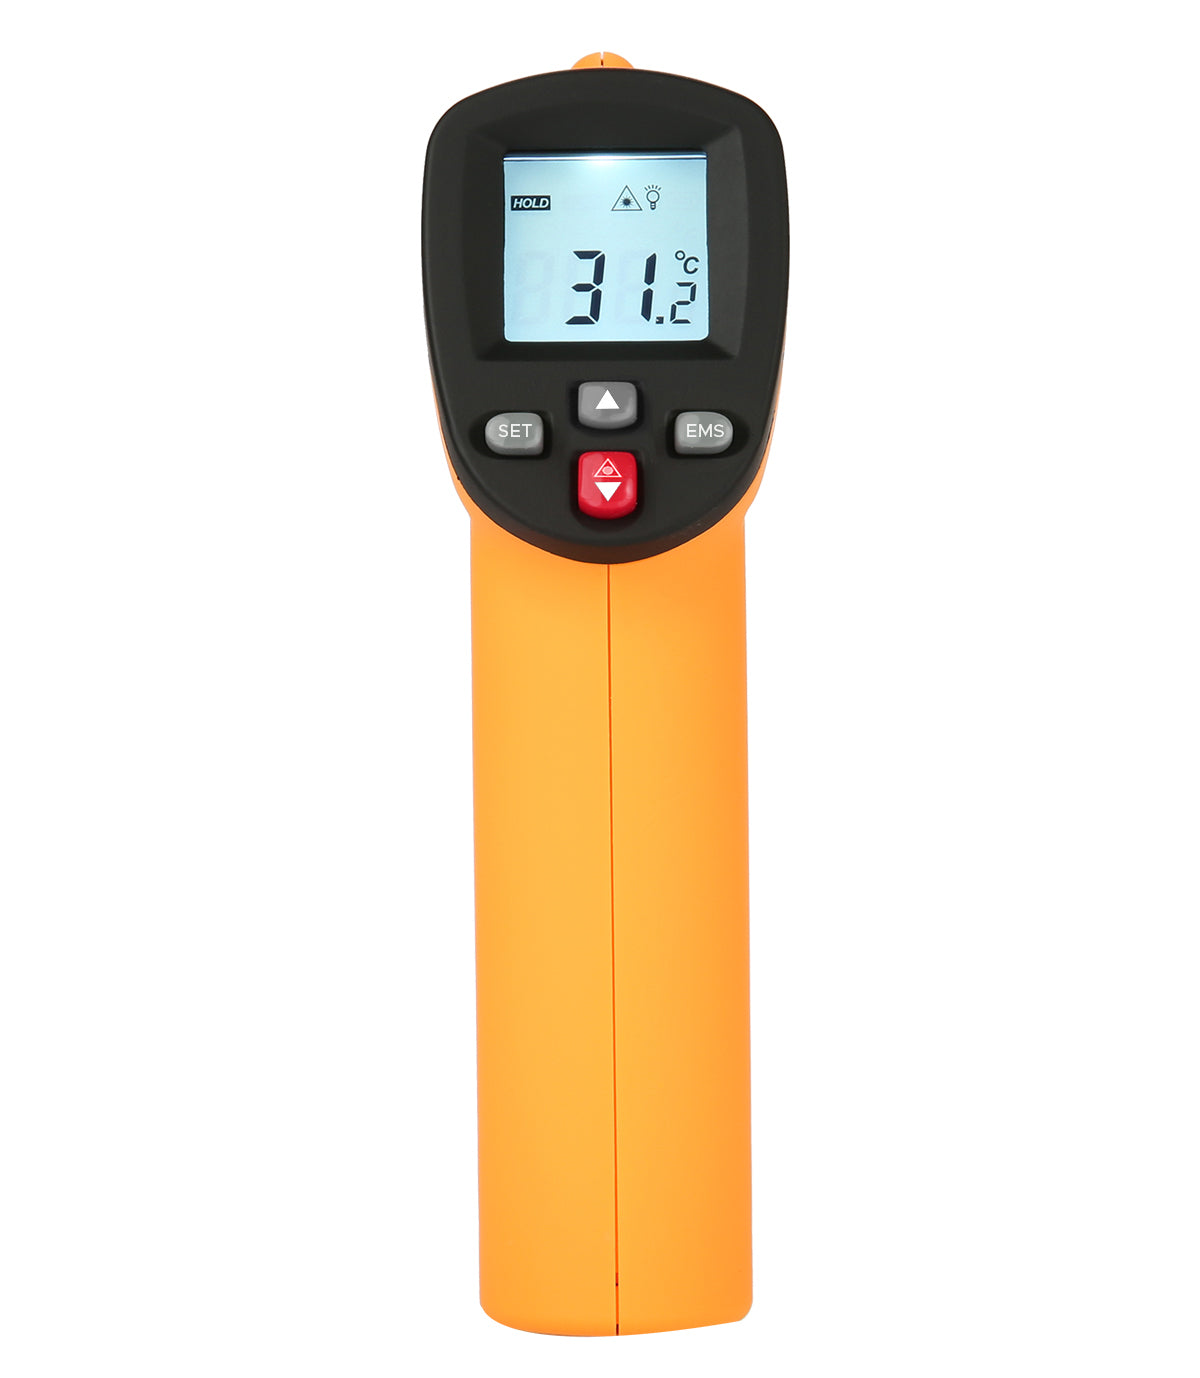 Benetech GM300H Non Contact Infrared Thermometer Laser Temperature IR Gun with 50° to 420° Celsius Range, 2° C Accuracy